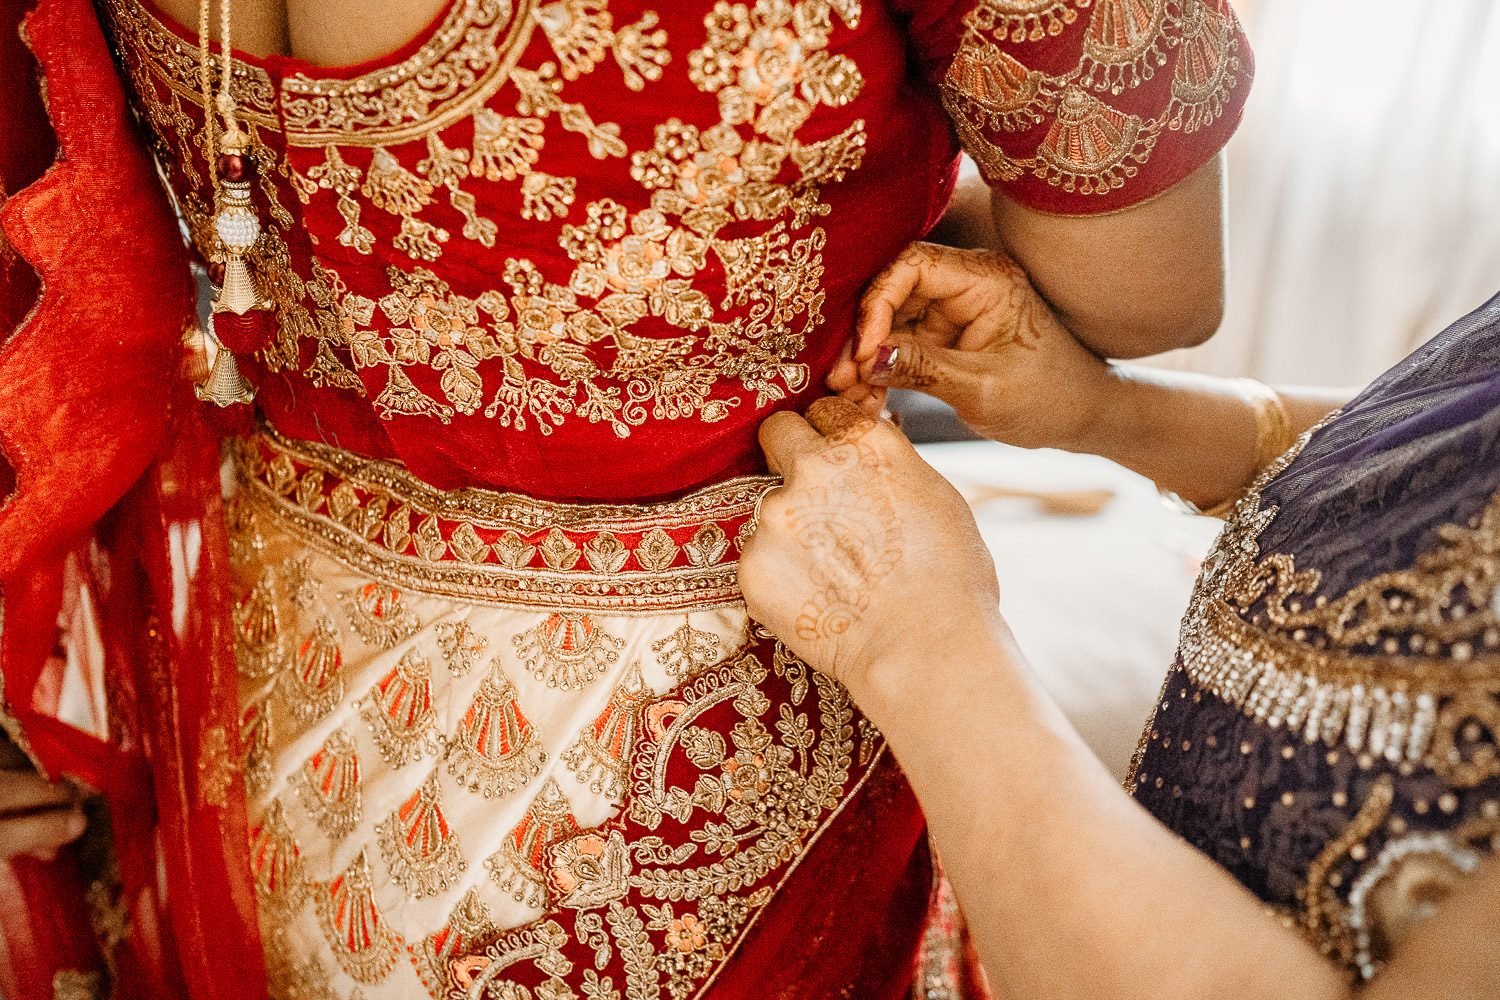 brides mother pinning red sari for bride